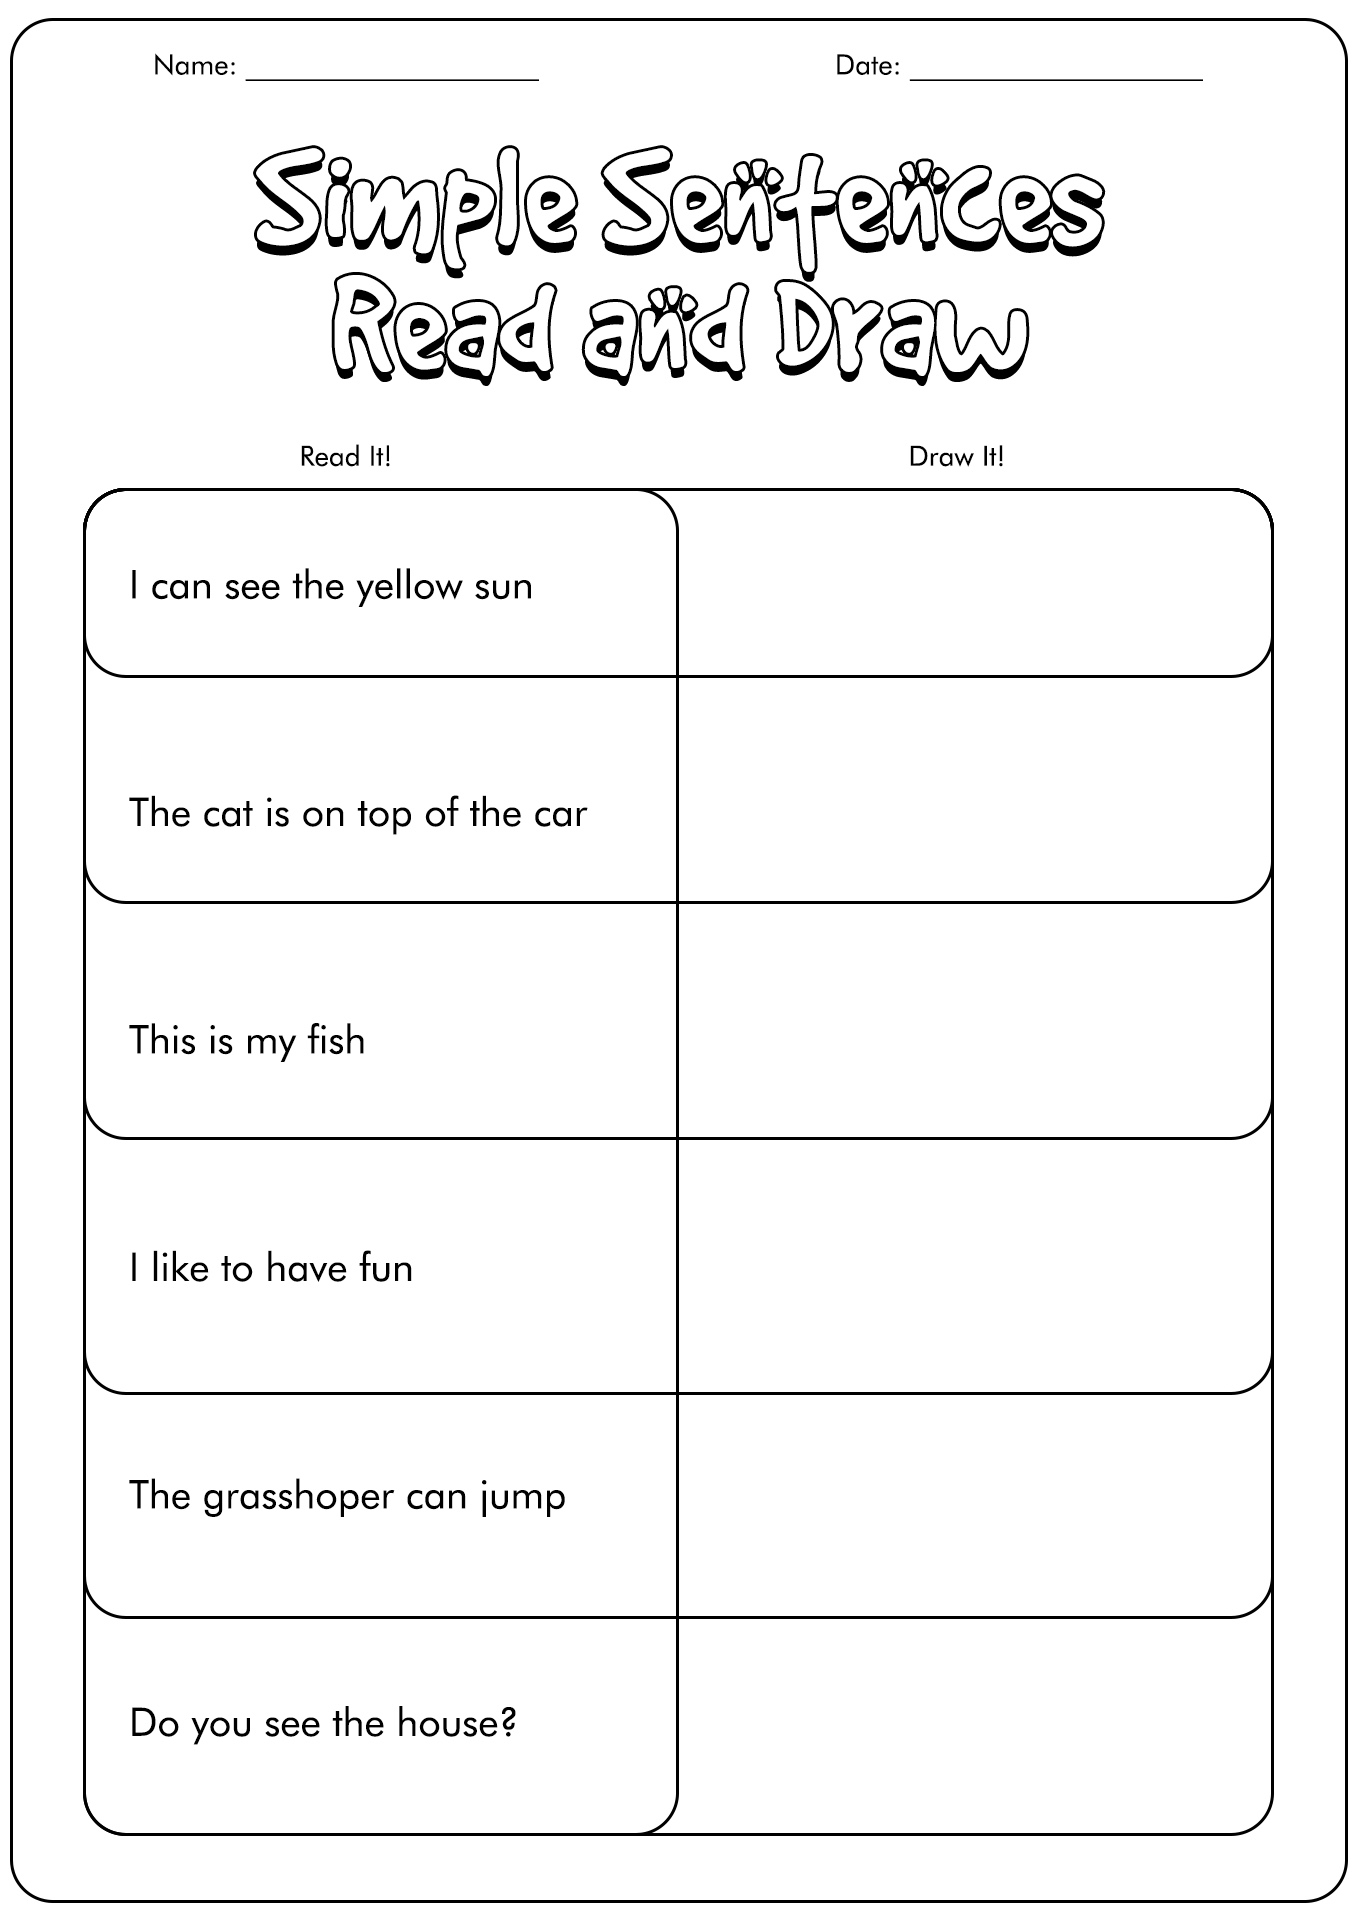 Read Draw and Simple Sentences Image